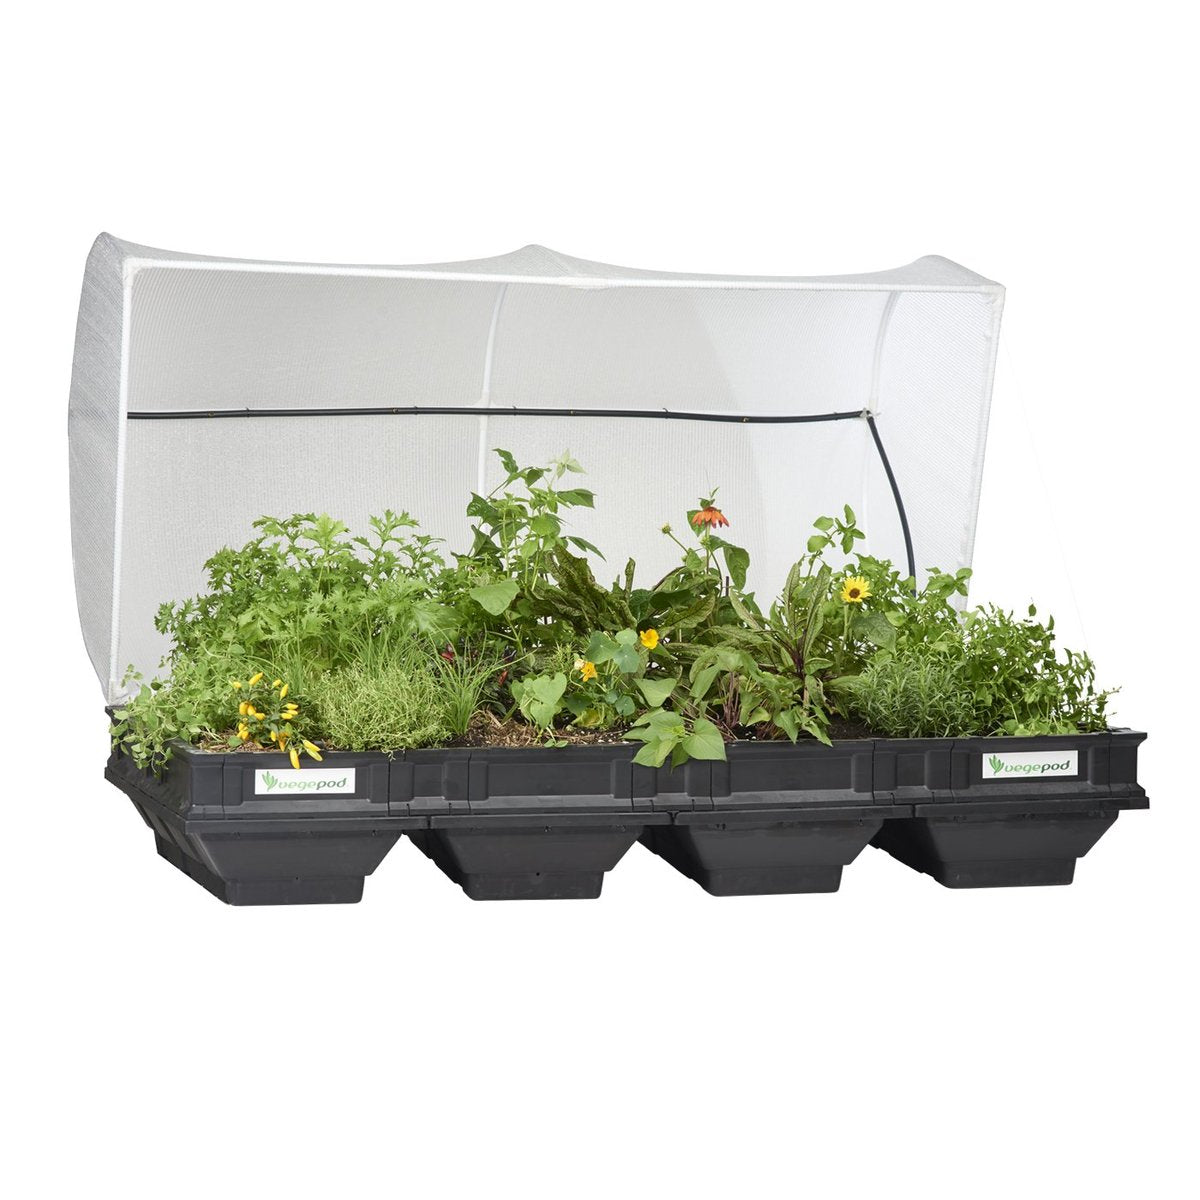 Vegepod Large Raised Garden Bed with Cover